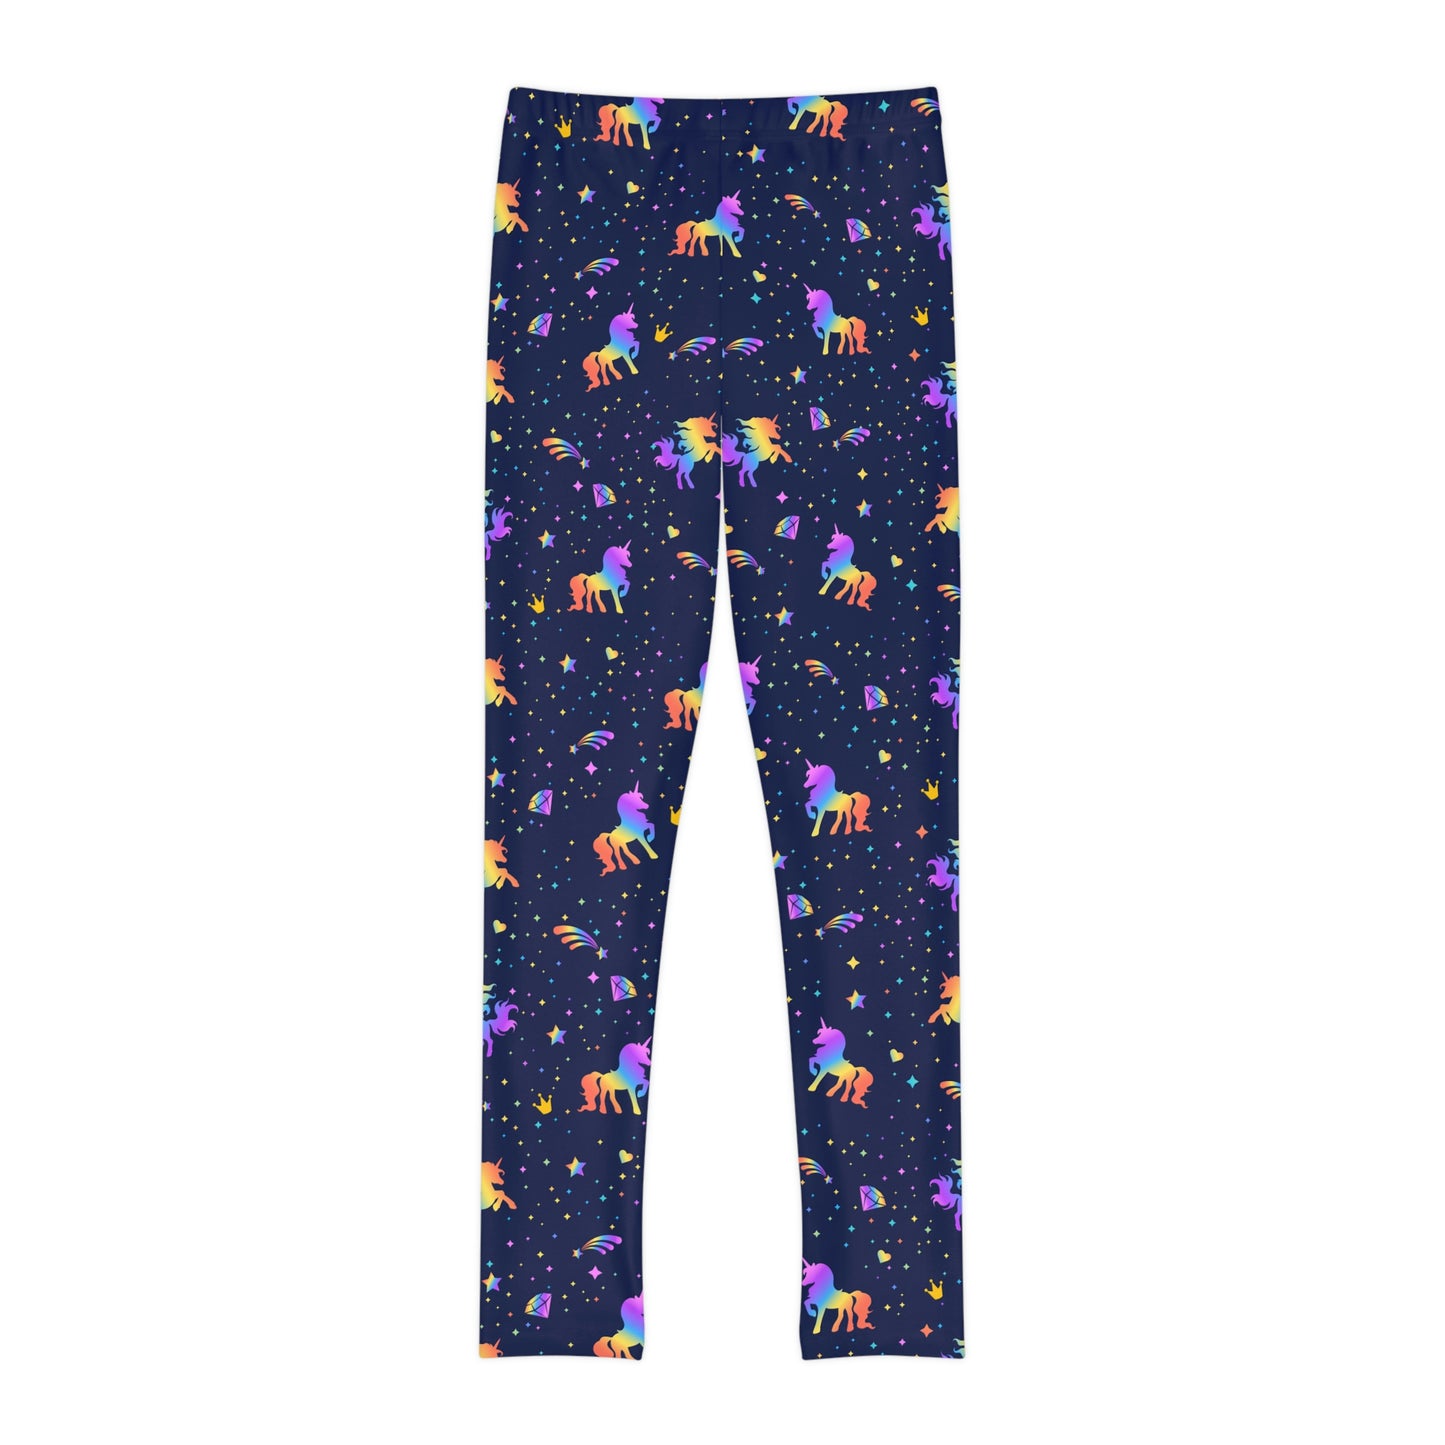 Unicorn Rainbows animal kingdom, Safari Youth Leggings, One of a Kind Gift - Unique Workout Activewear tights for kids, Daughter, Niece Christmas Gift